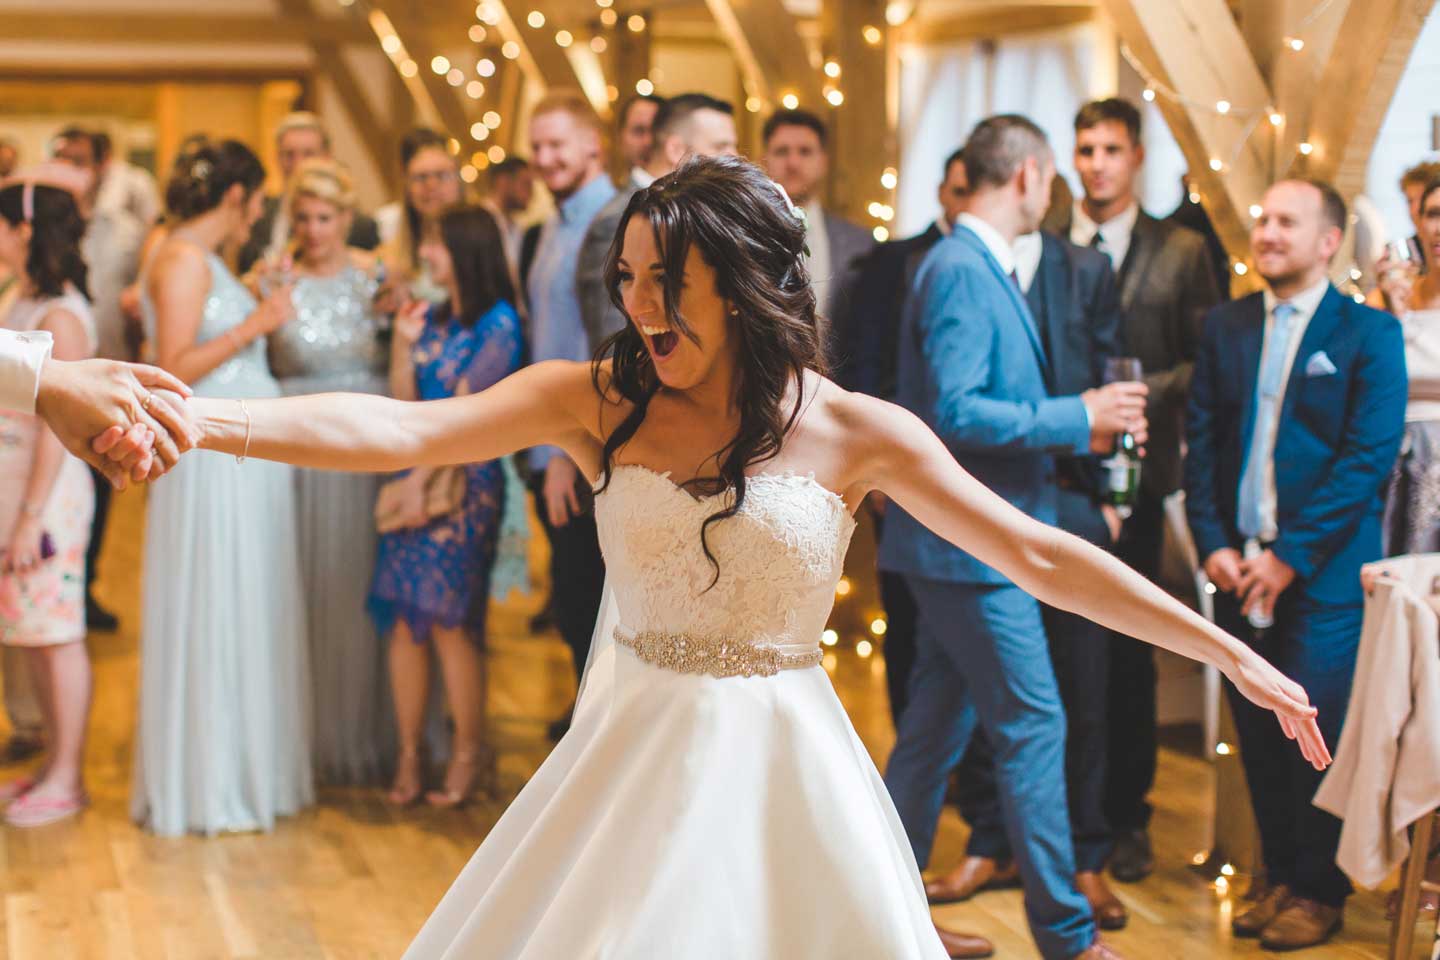 Bride takes to the dancefloor with her groom.